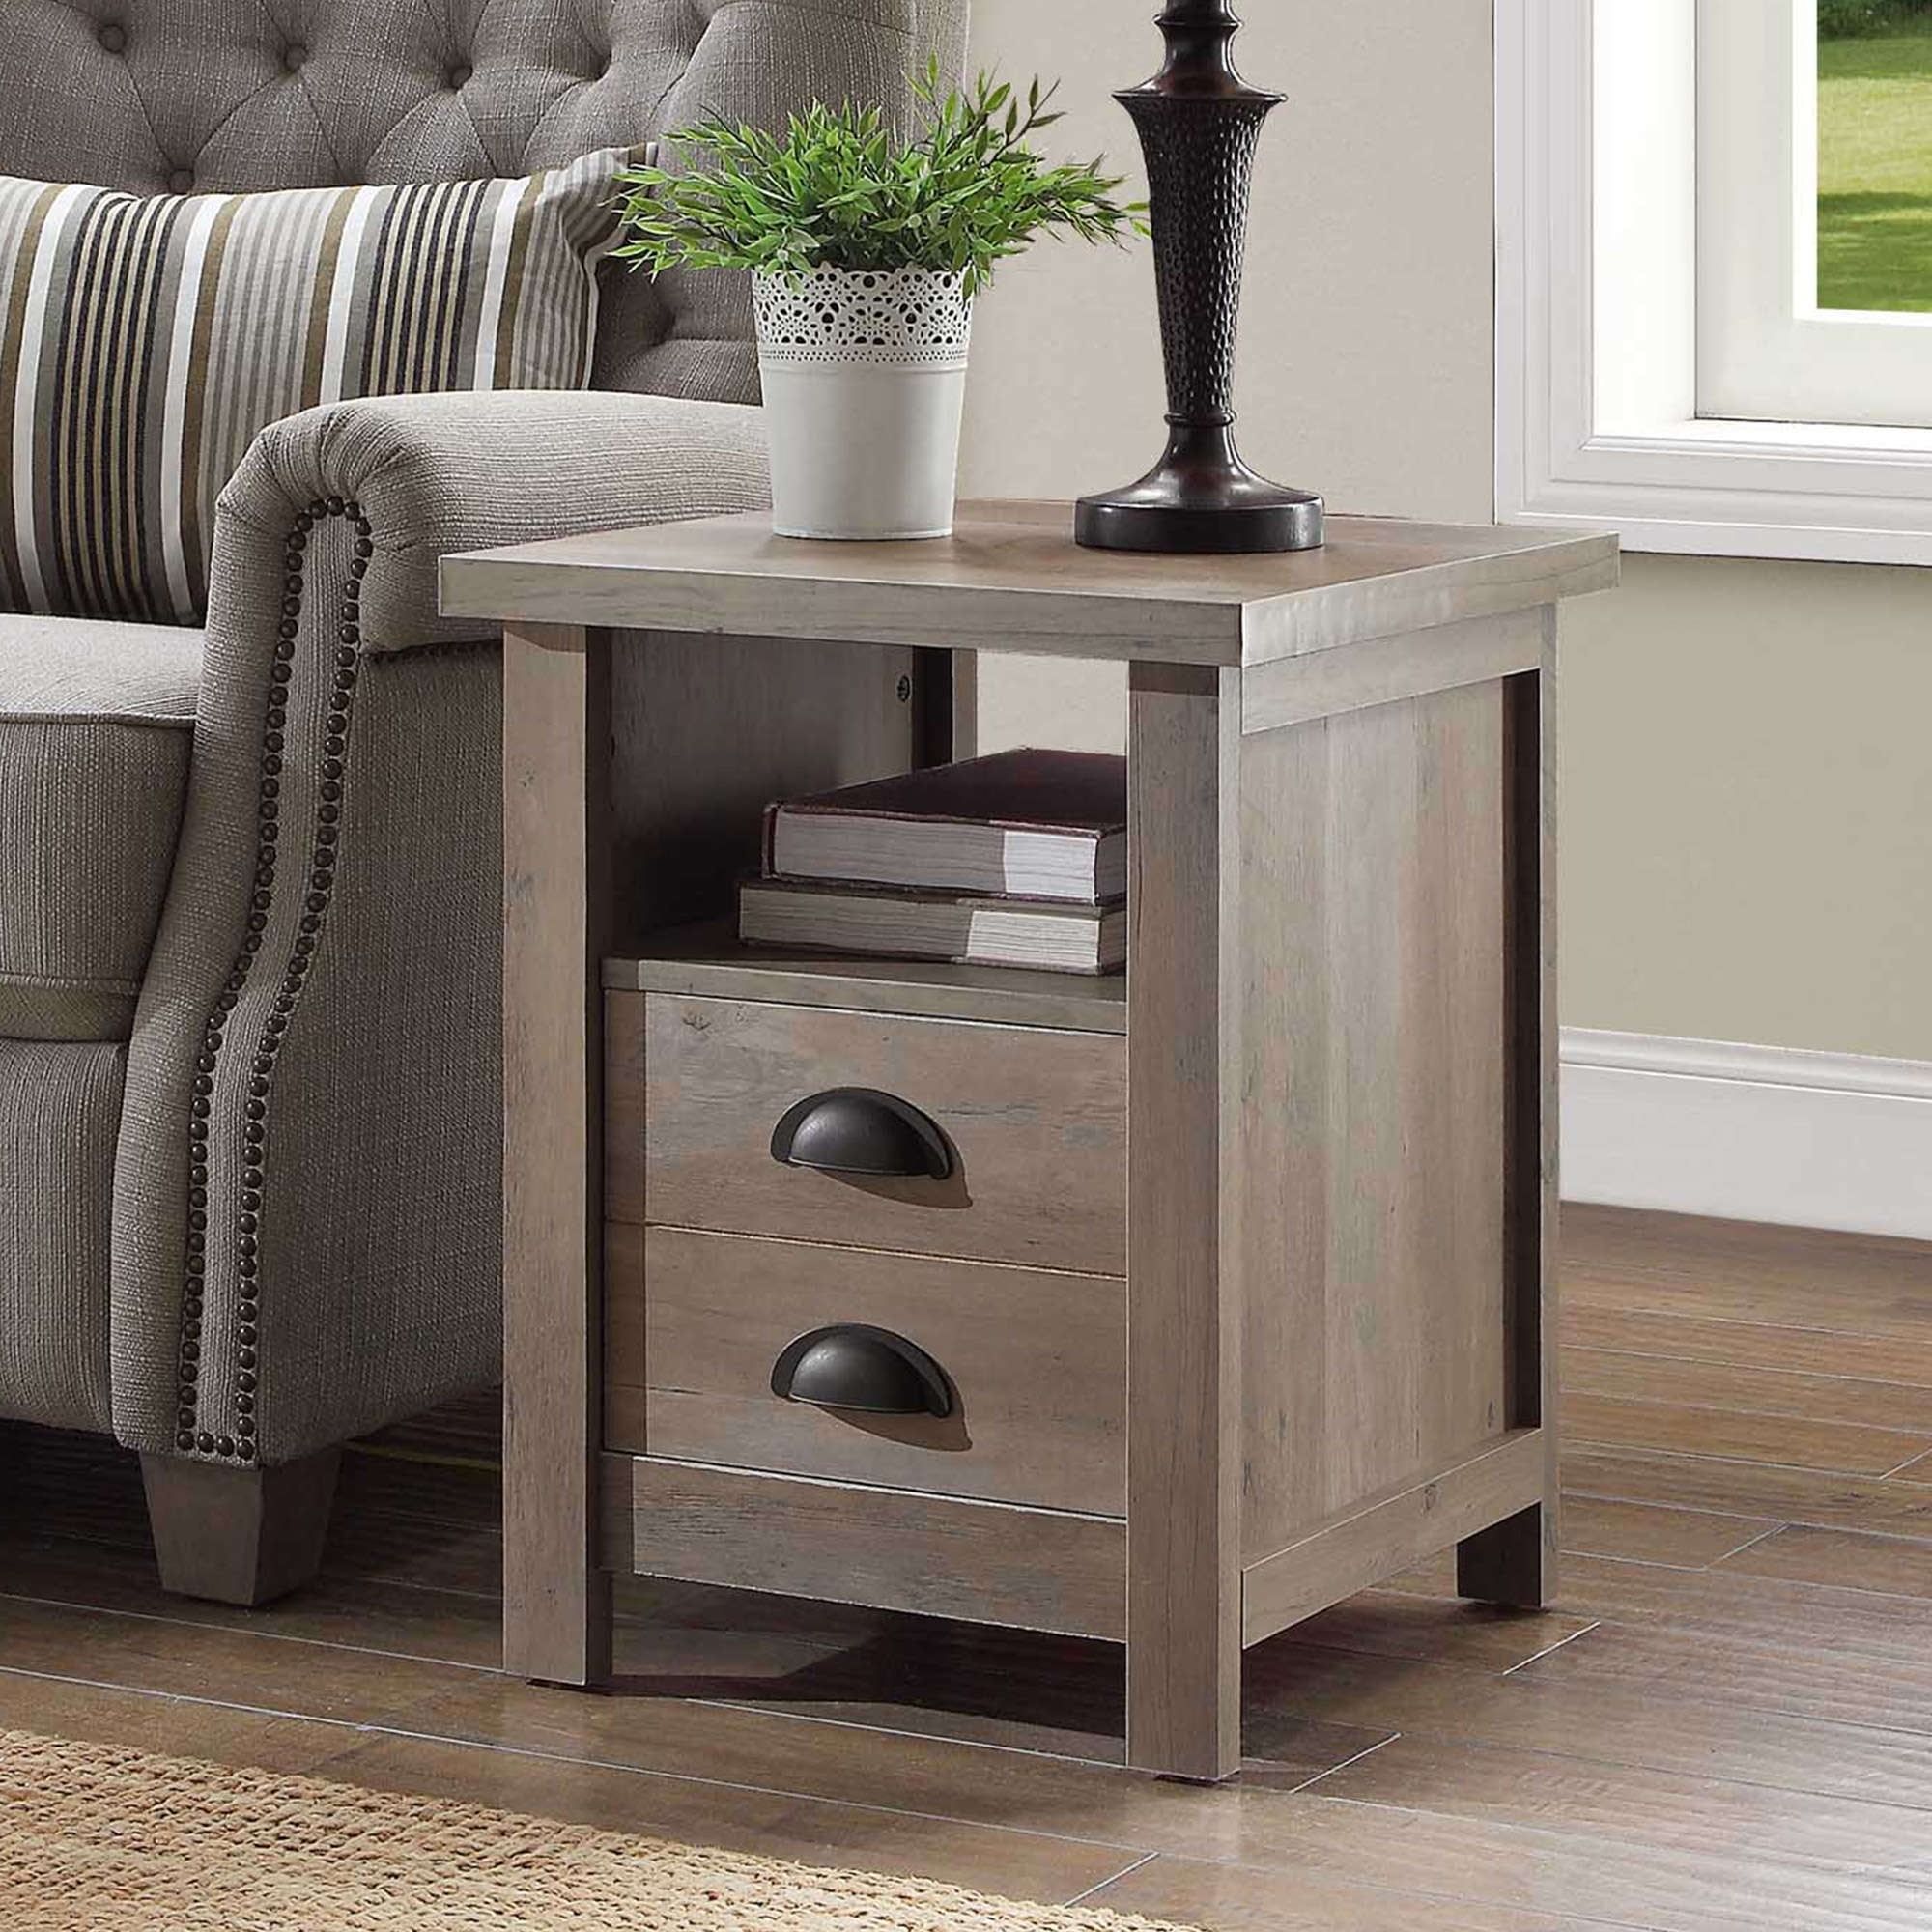 Homes And Gardens Granary Modern Farmhouse End Table Rustic Gray With Rustic Gray End Tables (Gallery 5 of 20)